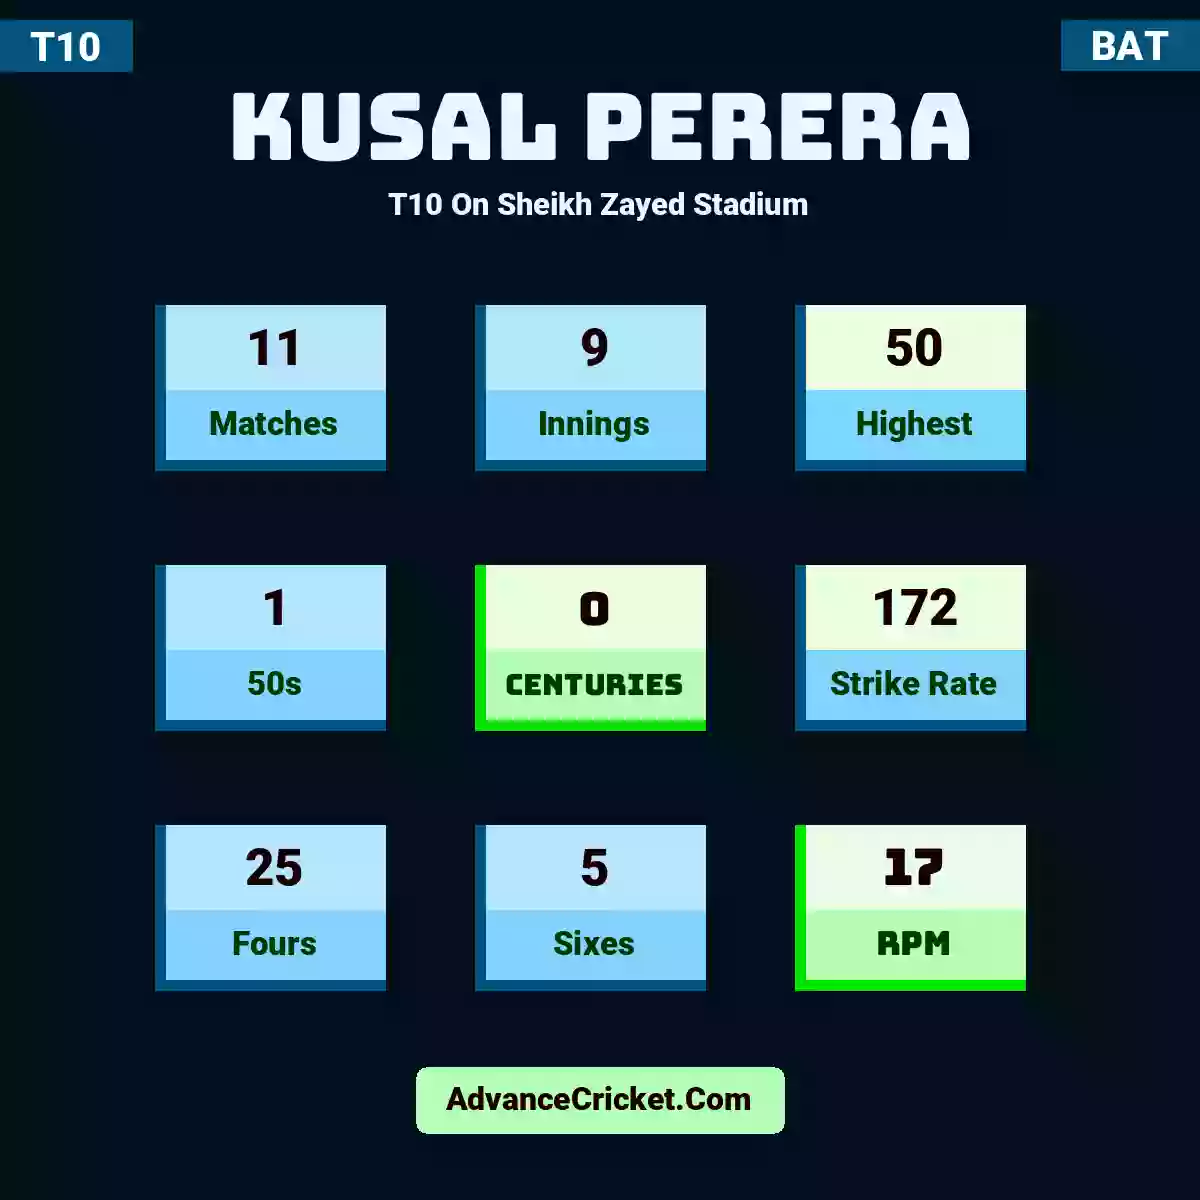 Kusal Perera T10  On Sheikh Zayed Stadium, Kusal Perera played 11 matches, scored 50 runs as highest, 1 half-centuries, and 0 centuries, with a strike rate of 172. K.Perera hit 25 fours and 5 sixes, with an RPM of 17.